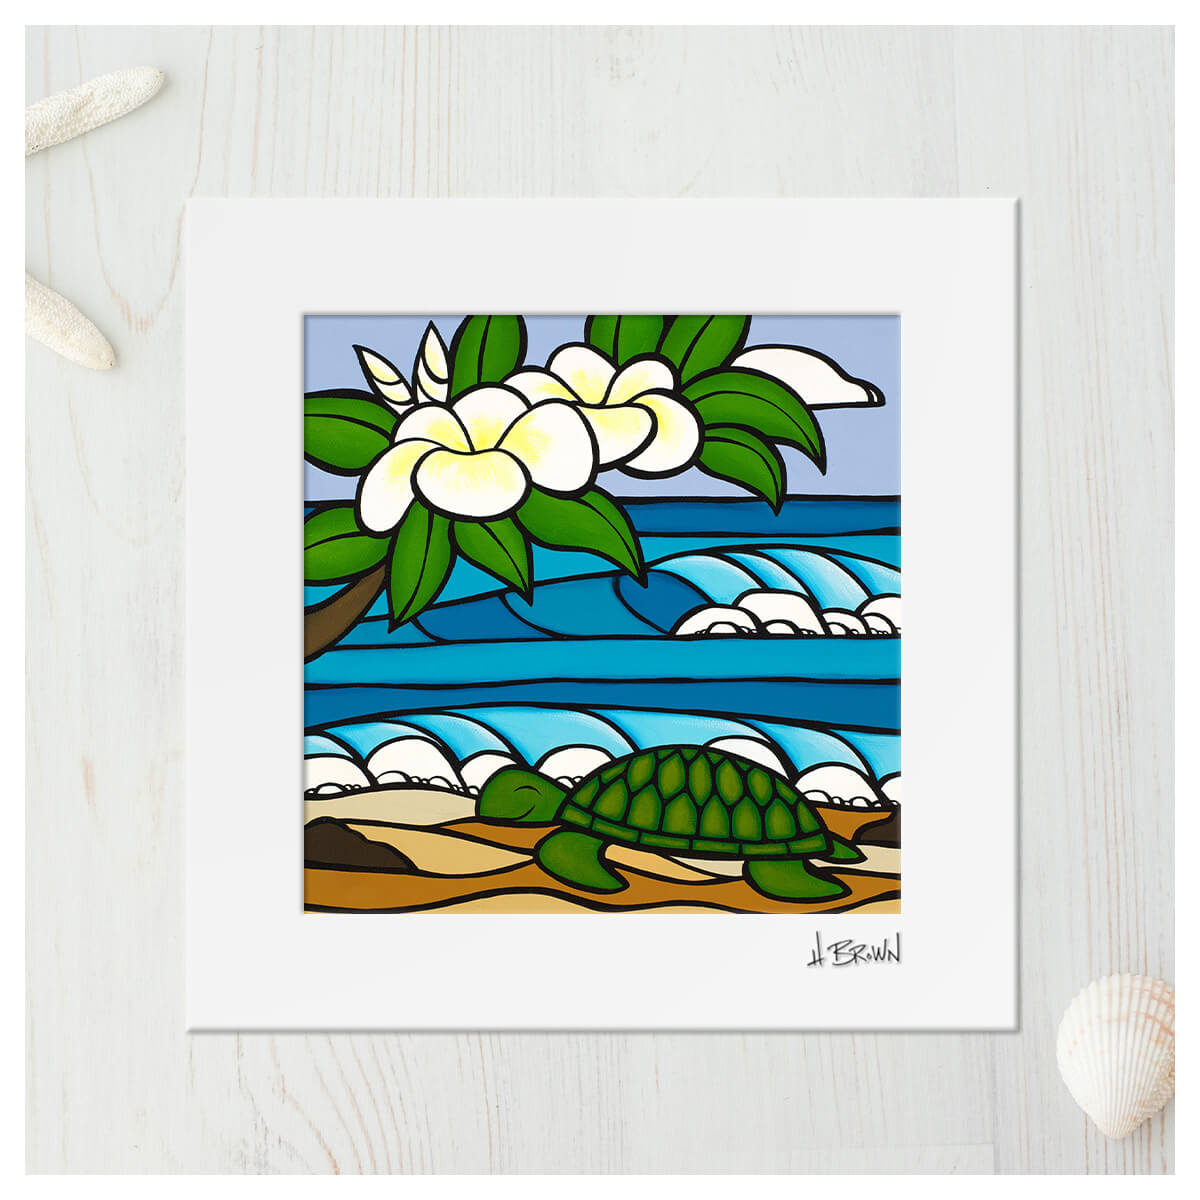 Matted art print by surf artist Heather Brown featuring a sleeping honu, or sea turtle, on the beach underneath a white plumeria tree